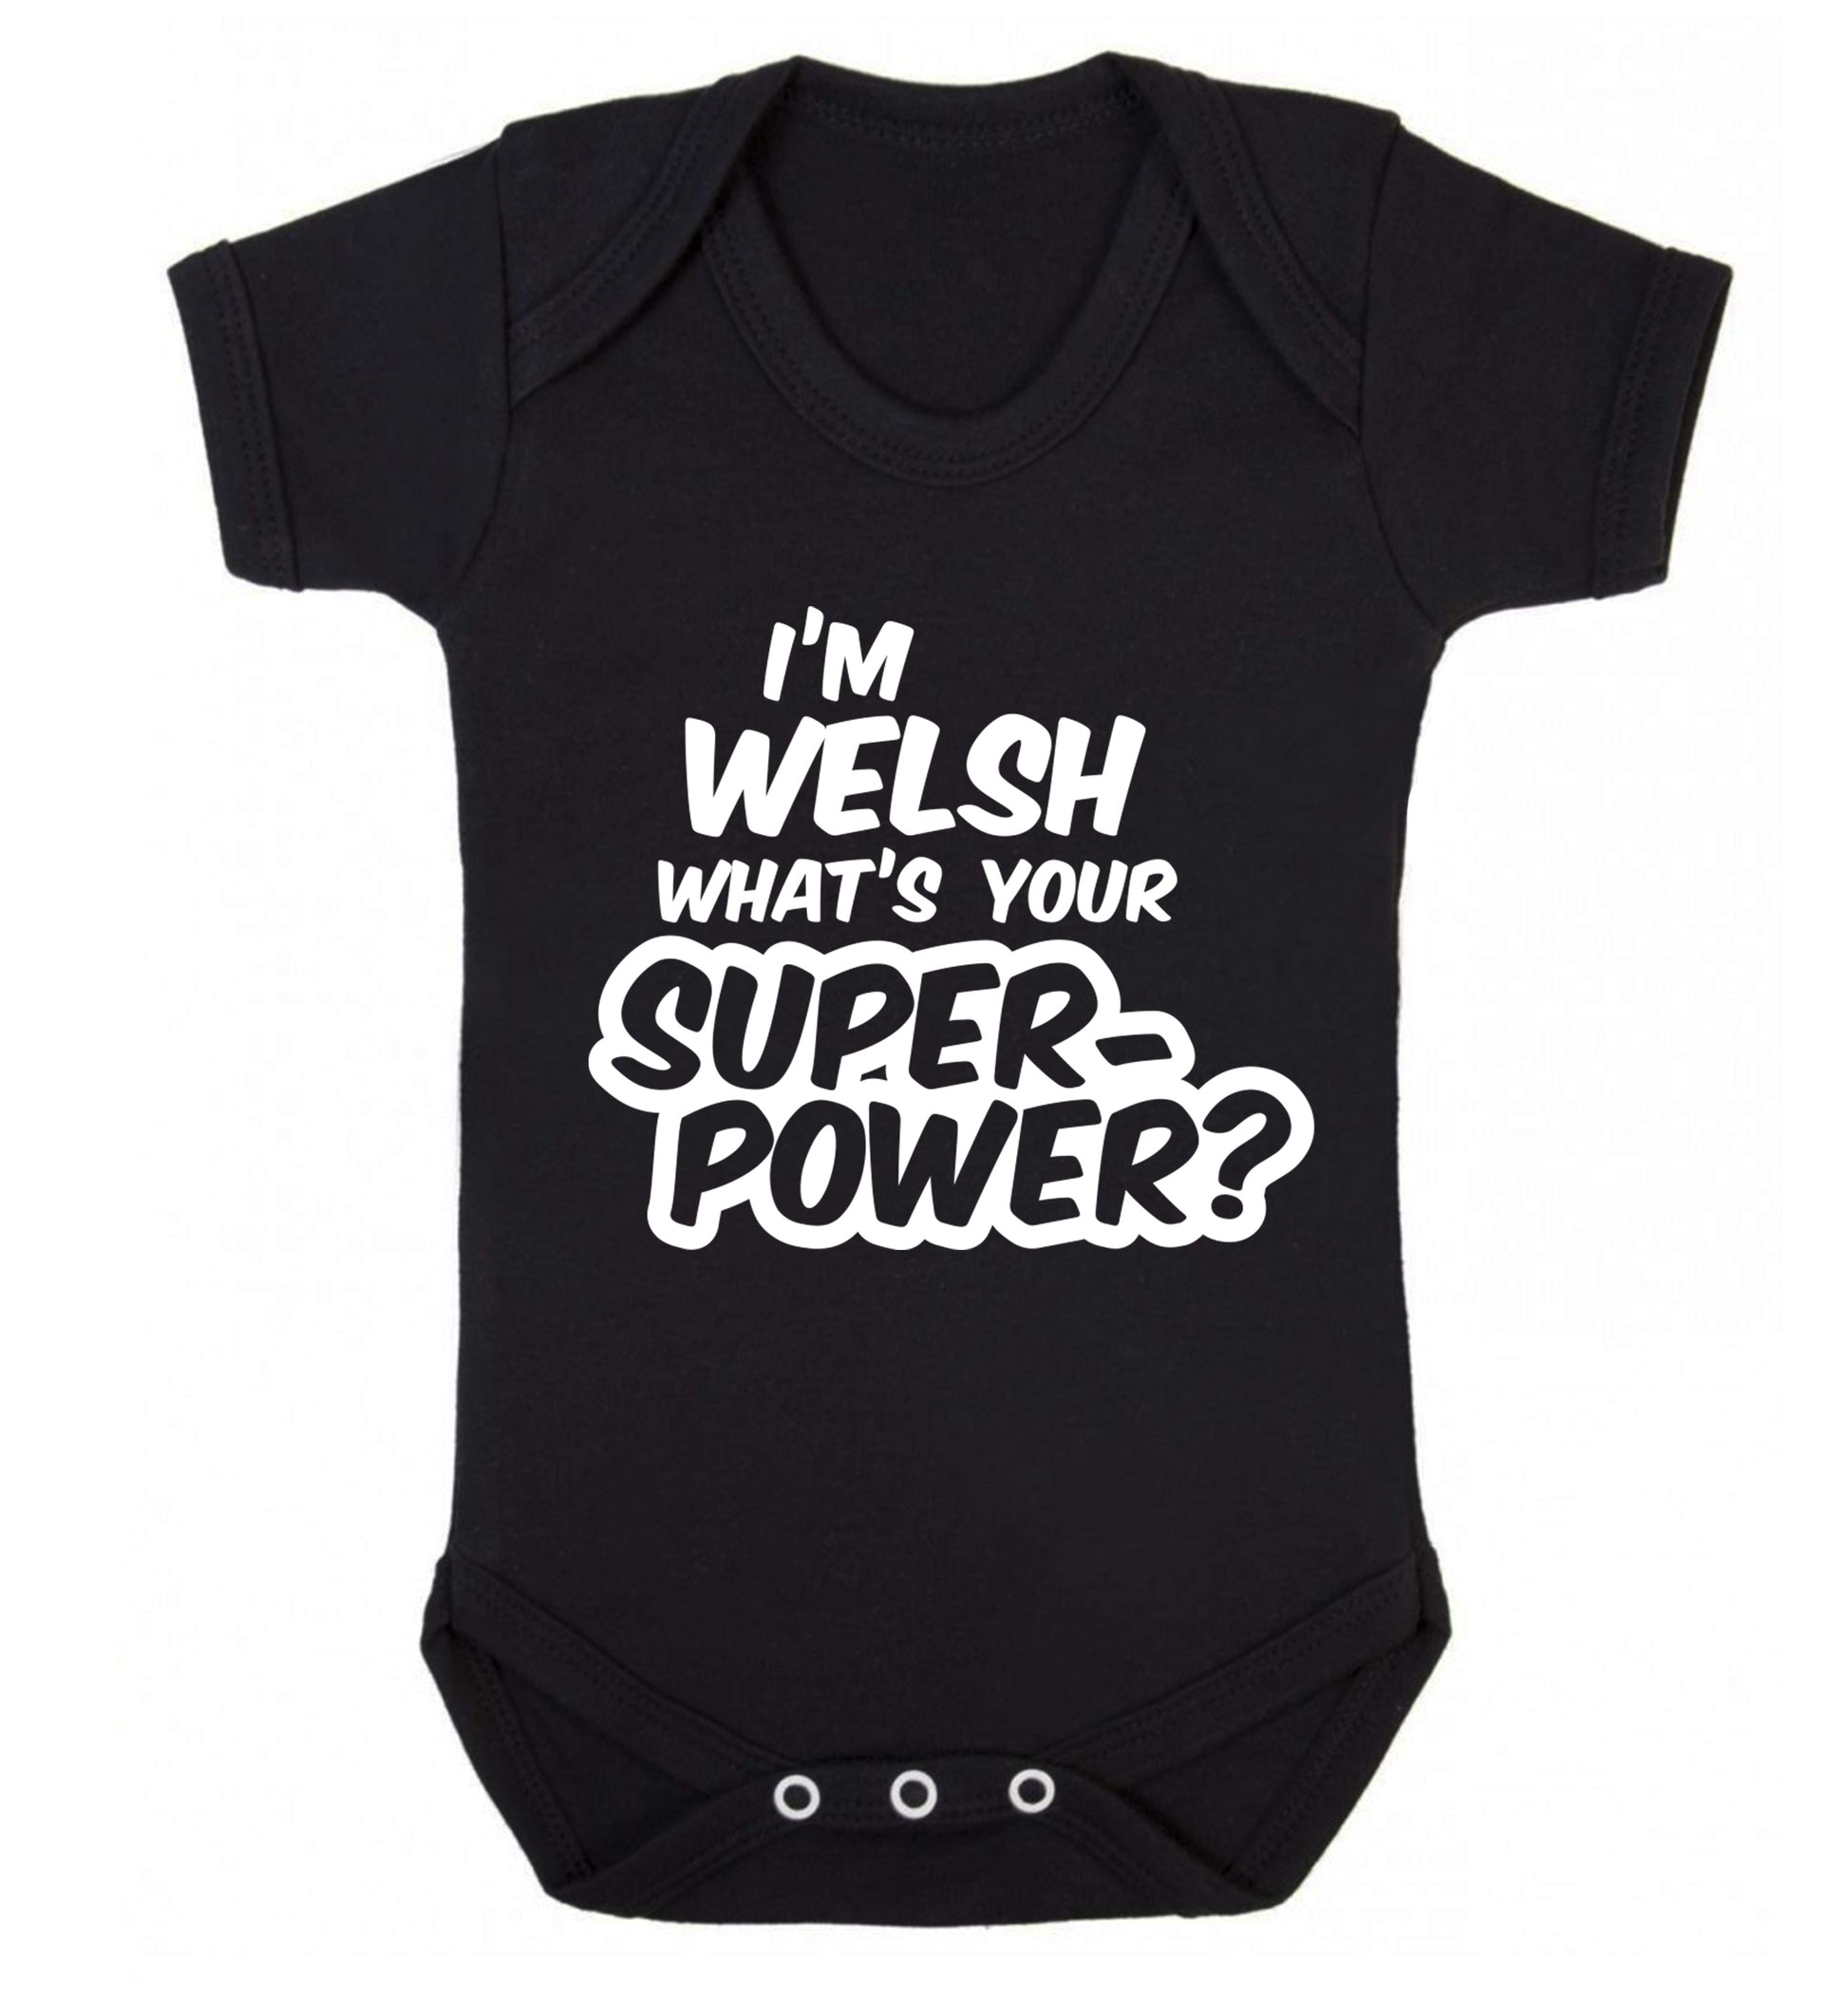 I'm Welsh what's your superpower? Baby Vest black 18-24 months